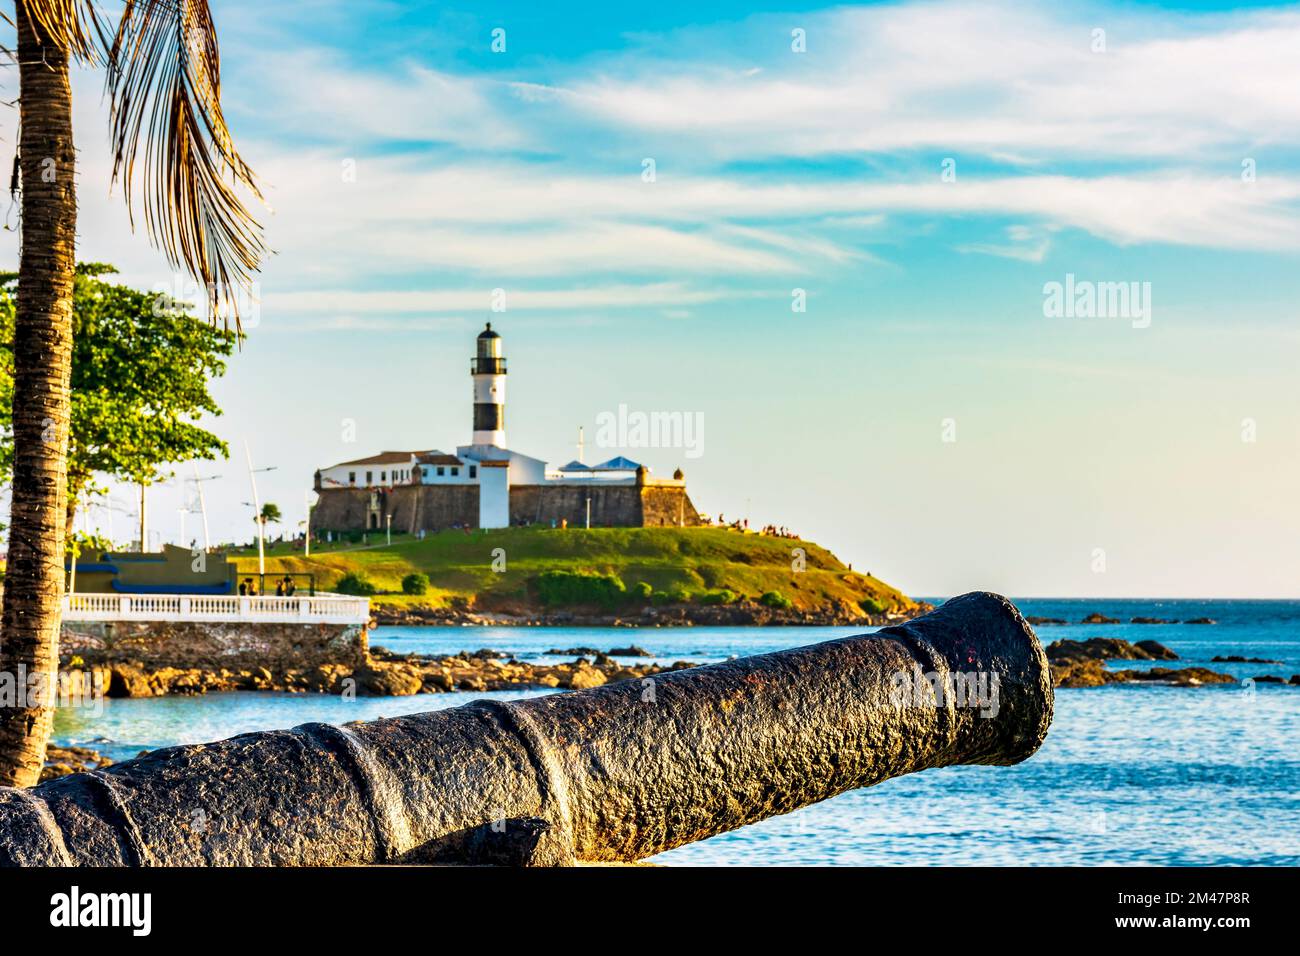 Old cannon and the Barra Lighthouse one of the main historical buildings and tourist spot in the city of Salvador in Bahia surrounded by the sea durin Stock Photo